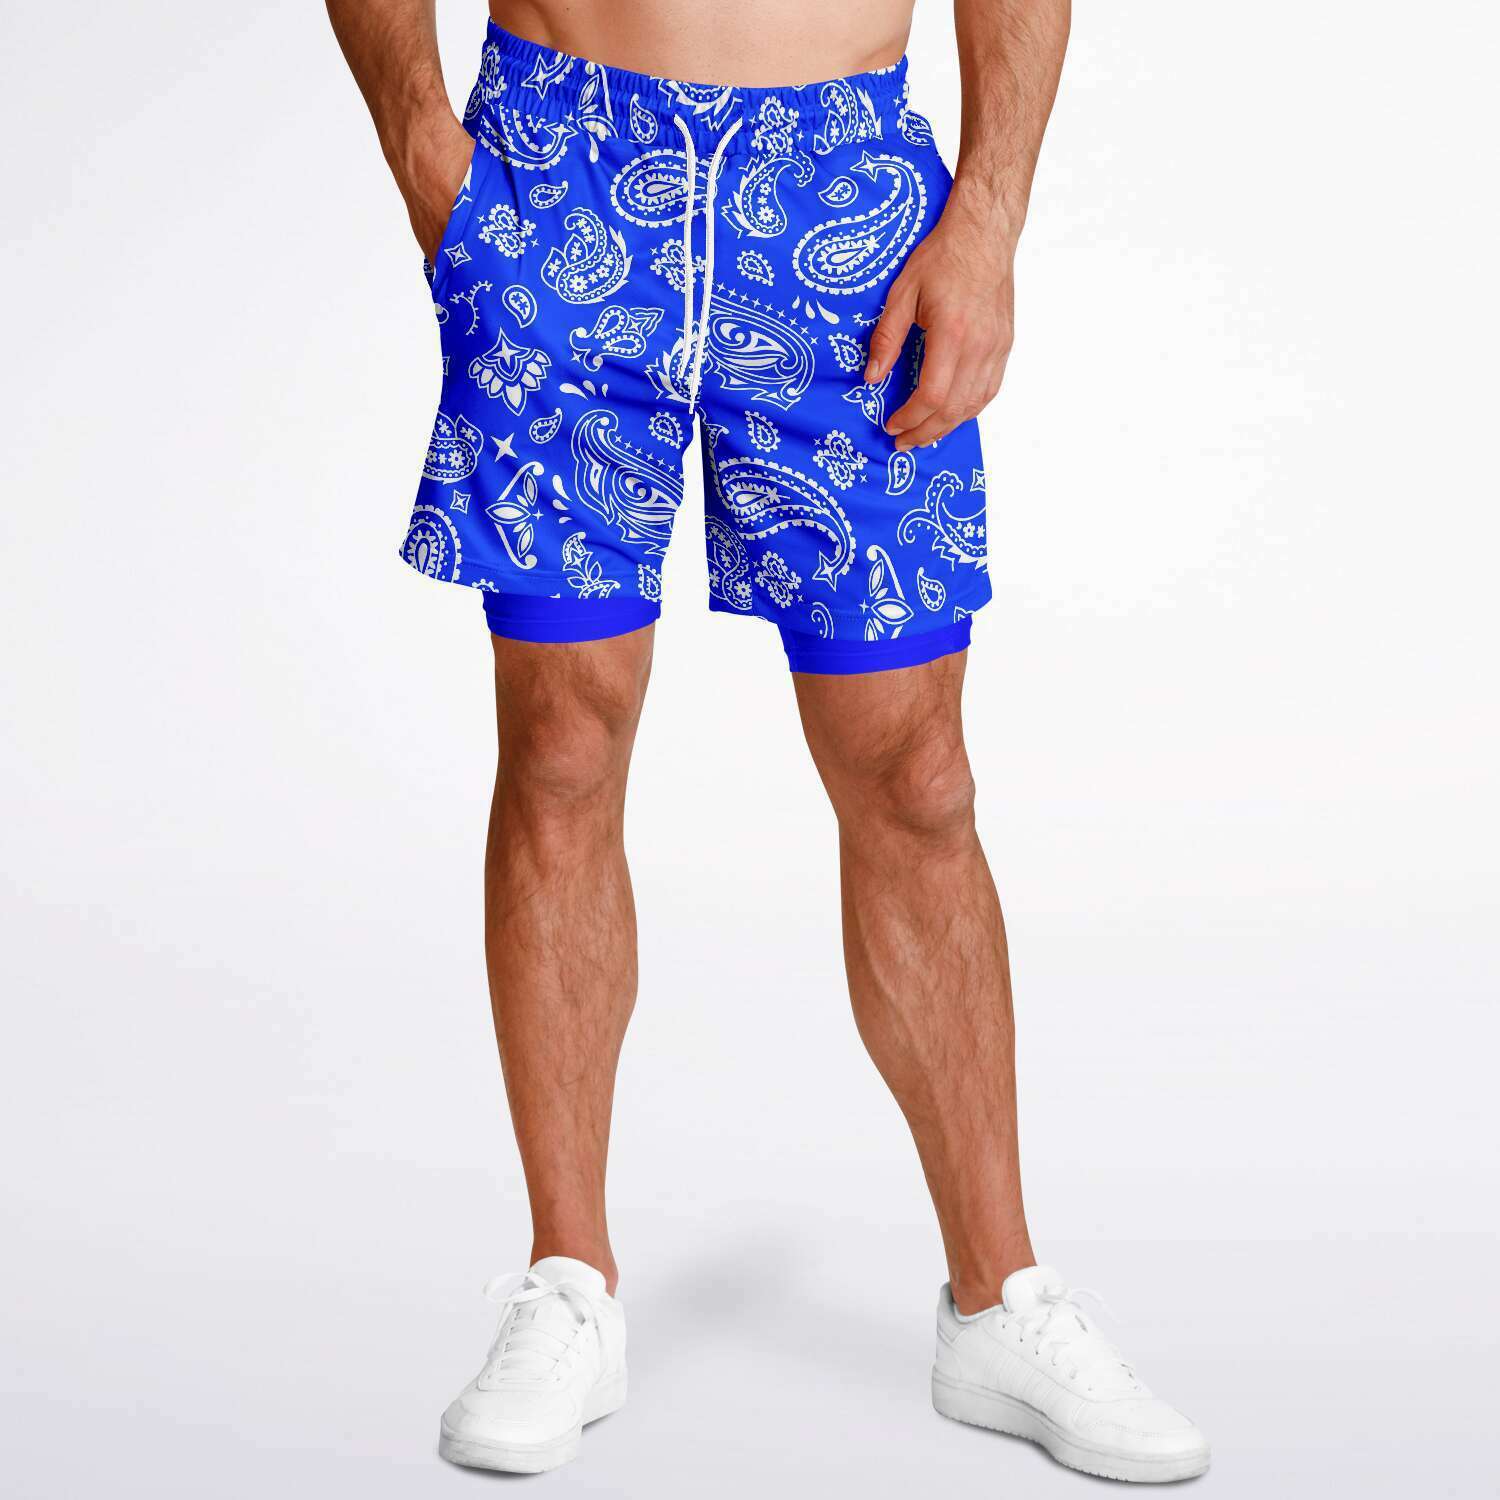 Men's 2-in-1 Classic Blue White Paisley Gym Shorts